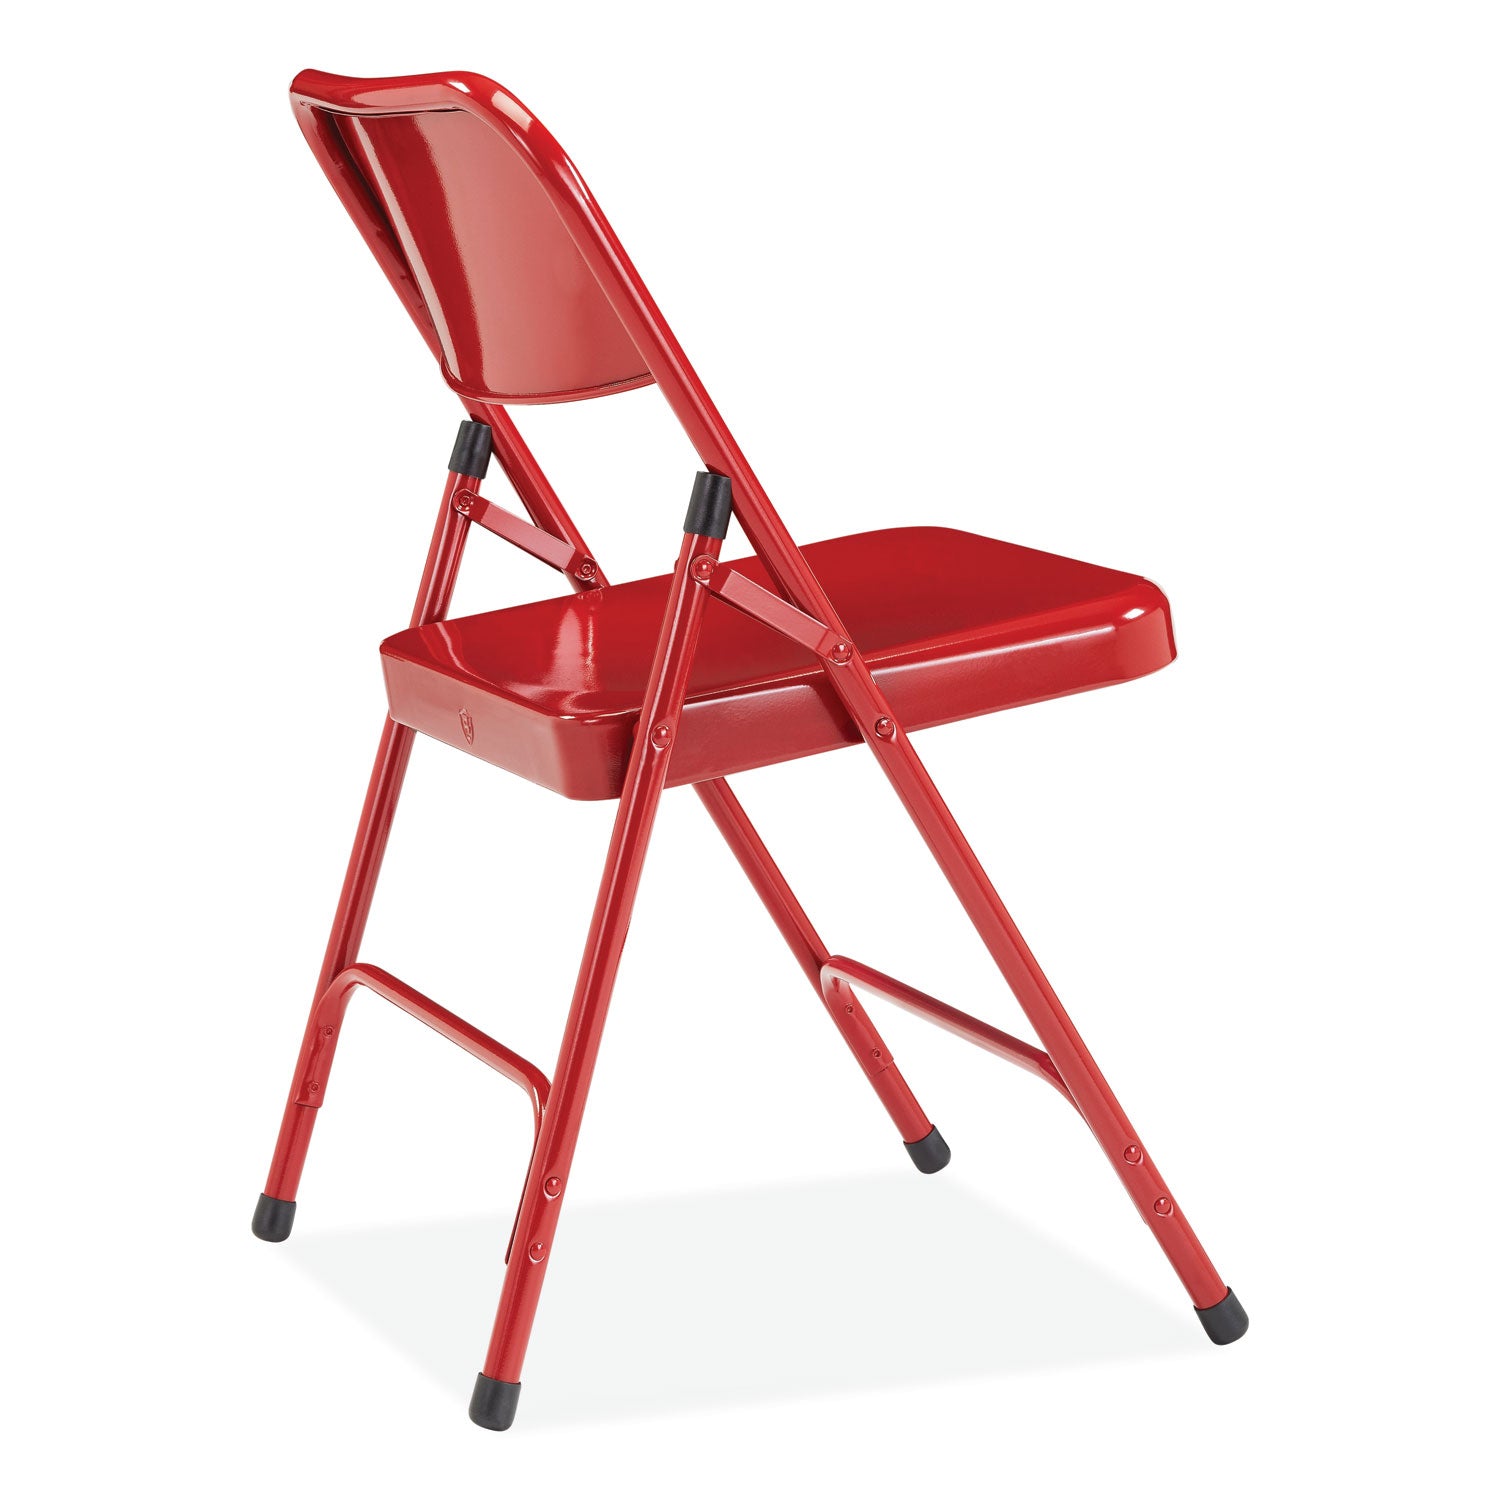 200-series-premium-all-steel-double-hinge-folding-chair-supports-500-lb-1725-seat-height-red-4-ctships-in-1-3-bus-days_nps240 - 4